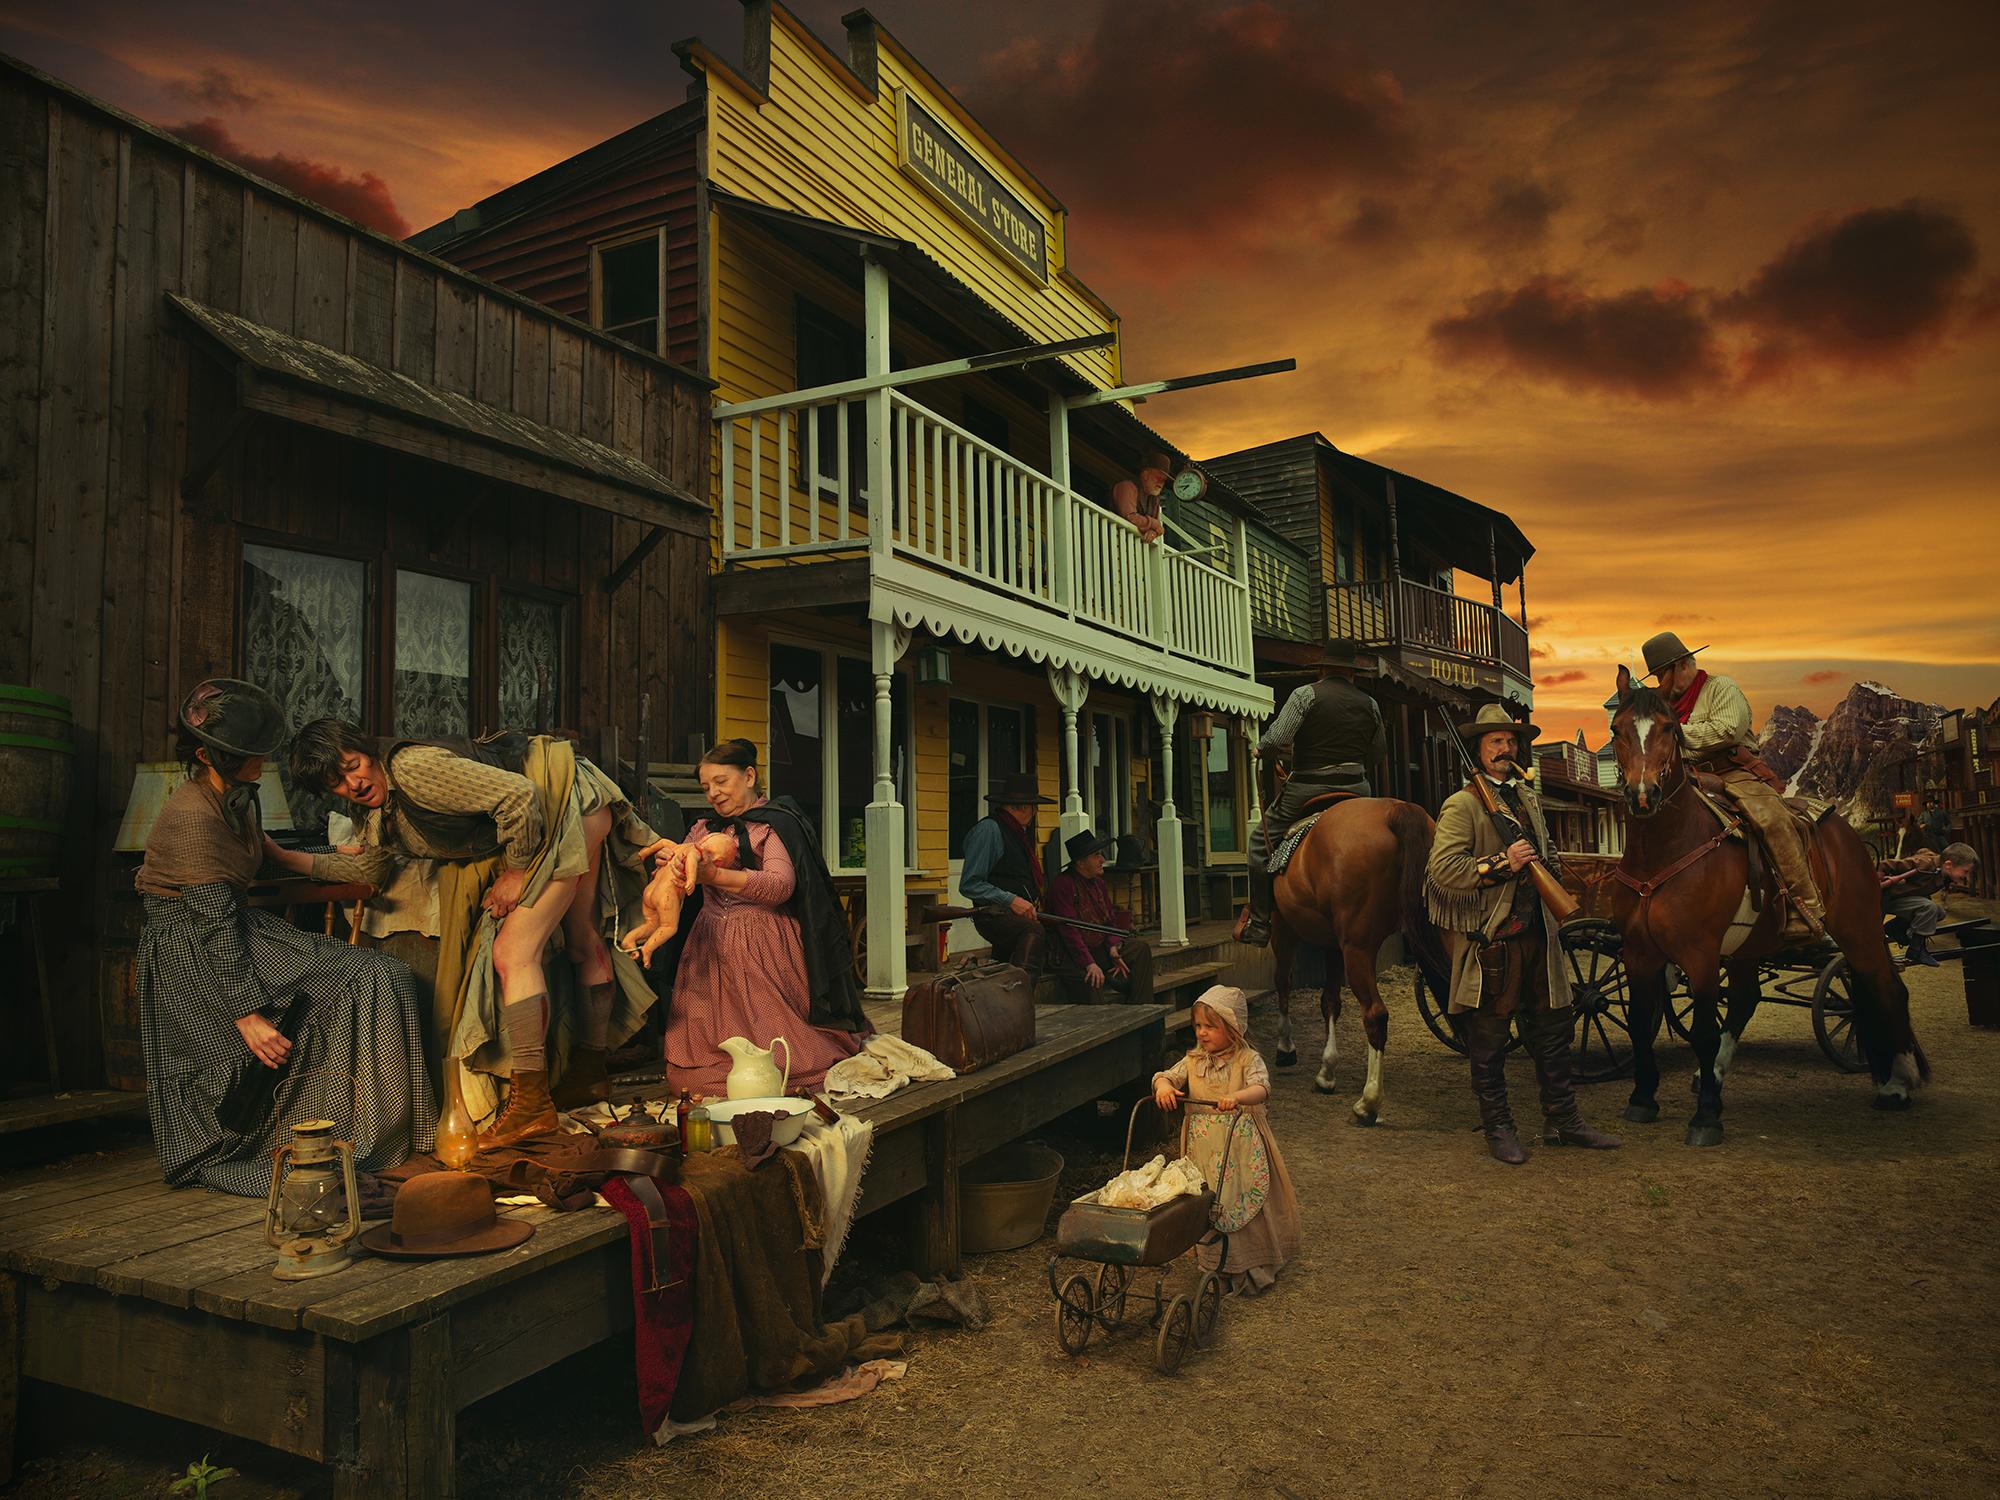 Born of Calamity-  Staged Photograph of Wild West + Calamity Jane (Green+Rust)